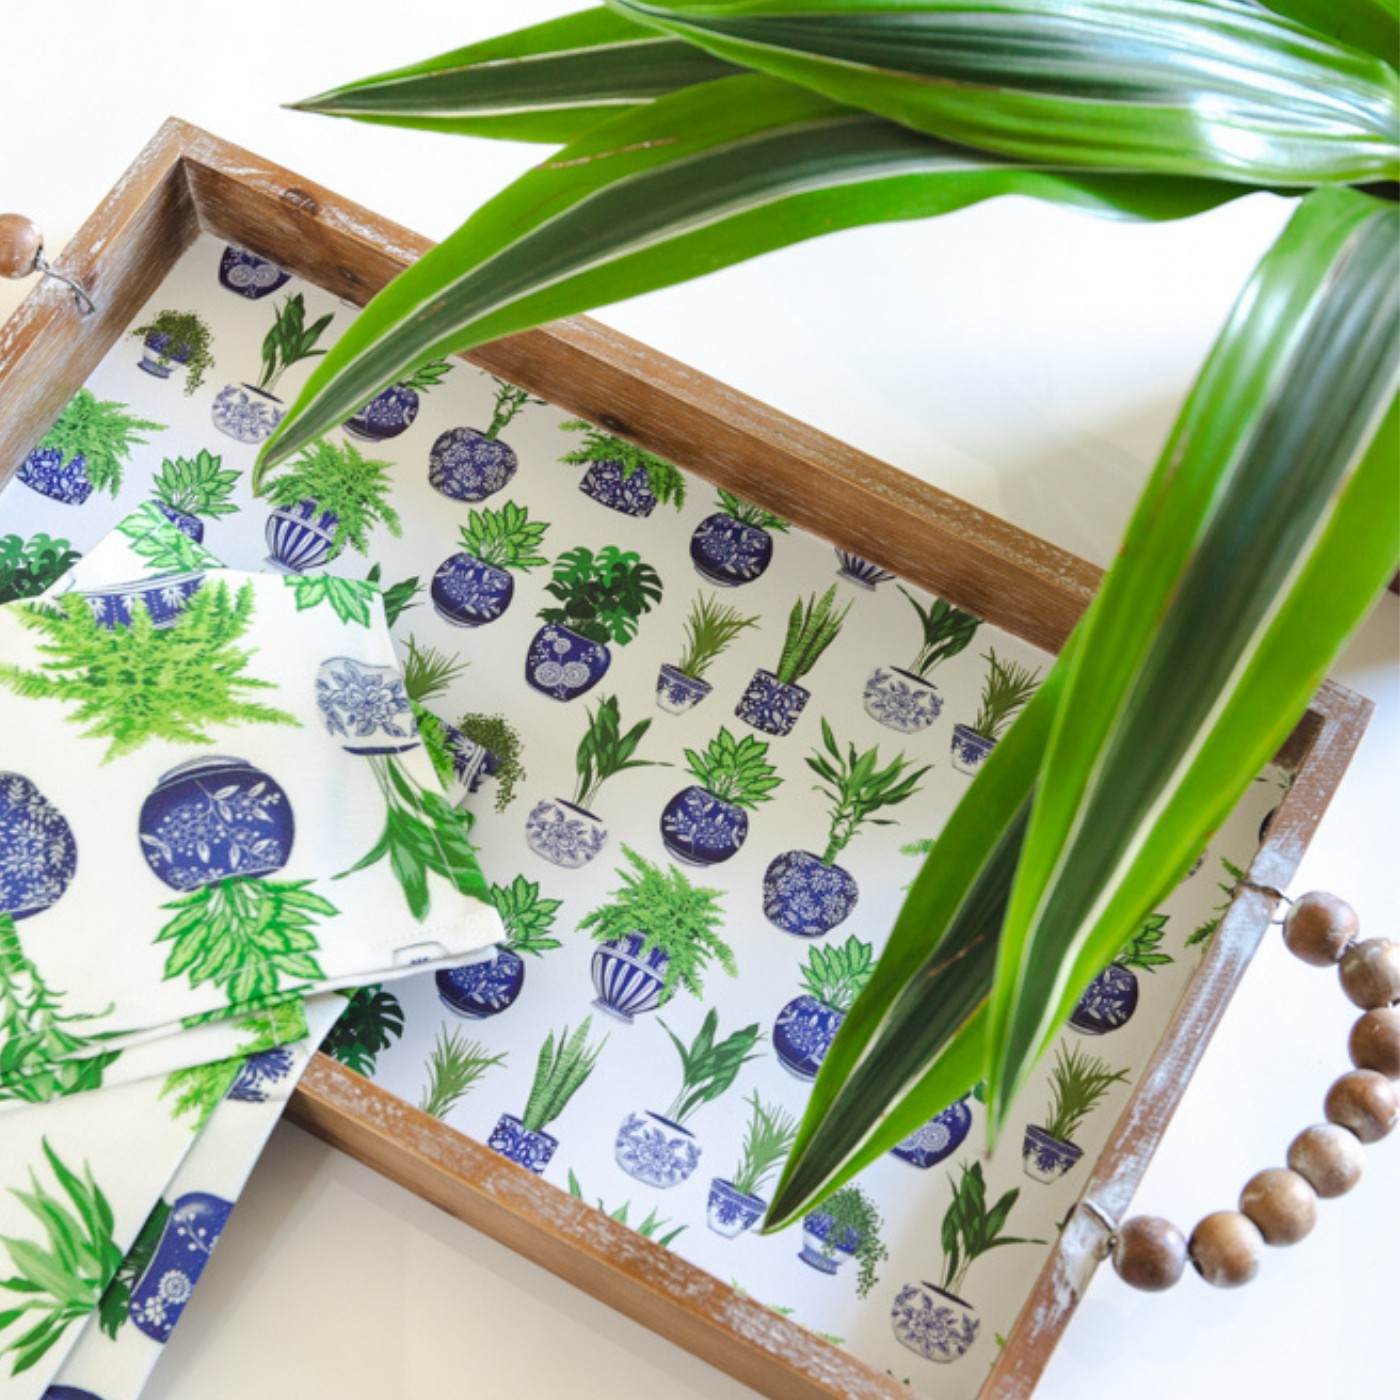 A wooden tray with curved handles comprised of small wooden beads sits on a white table with a plant with long extended leaves. Some of the plant fronds are hanging over the tray. The surface of the tray is covered in a design with a white background and rows of small green plants in blue pots. Napkins in the same design are laying at the bottom left of the tray.